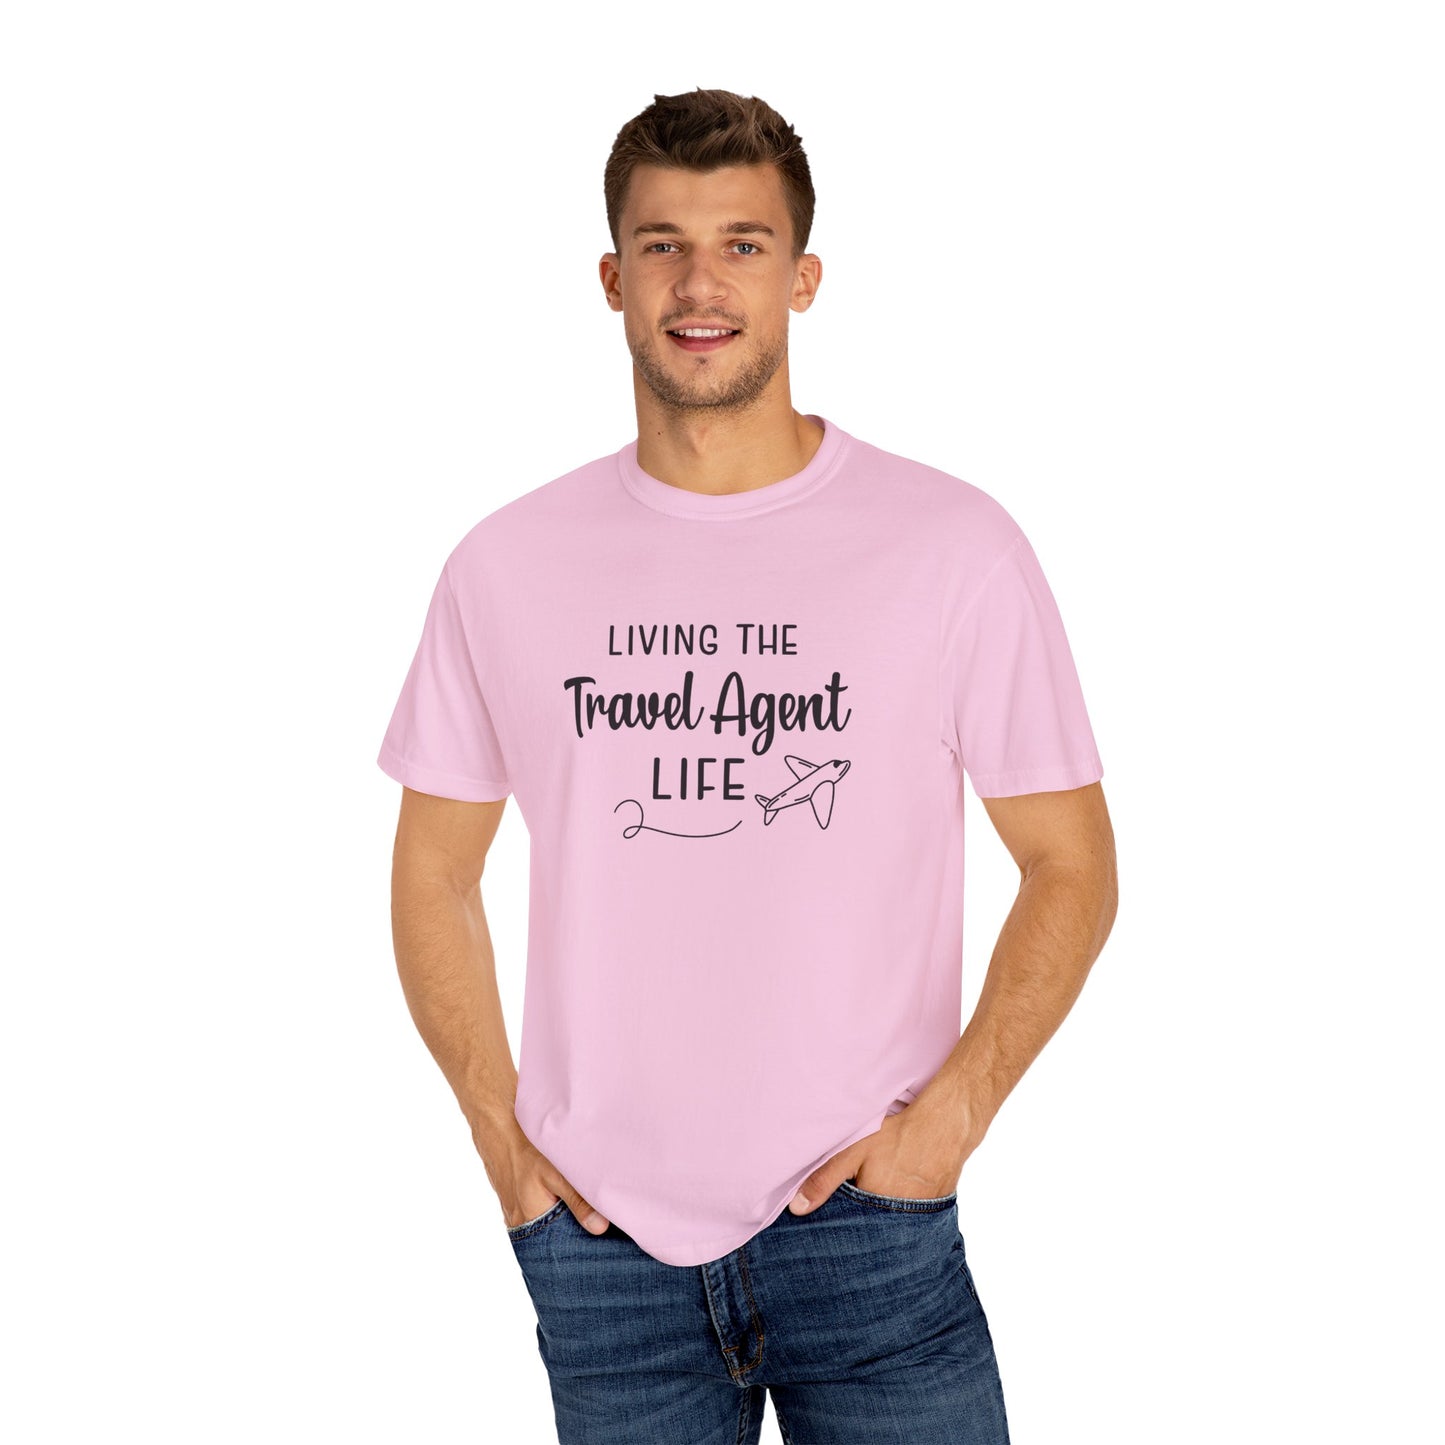 Living the Travel Agent Life T-shirt